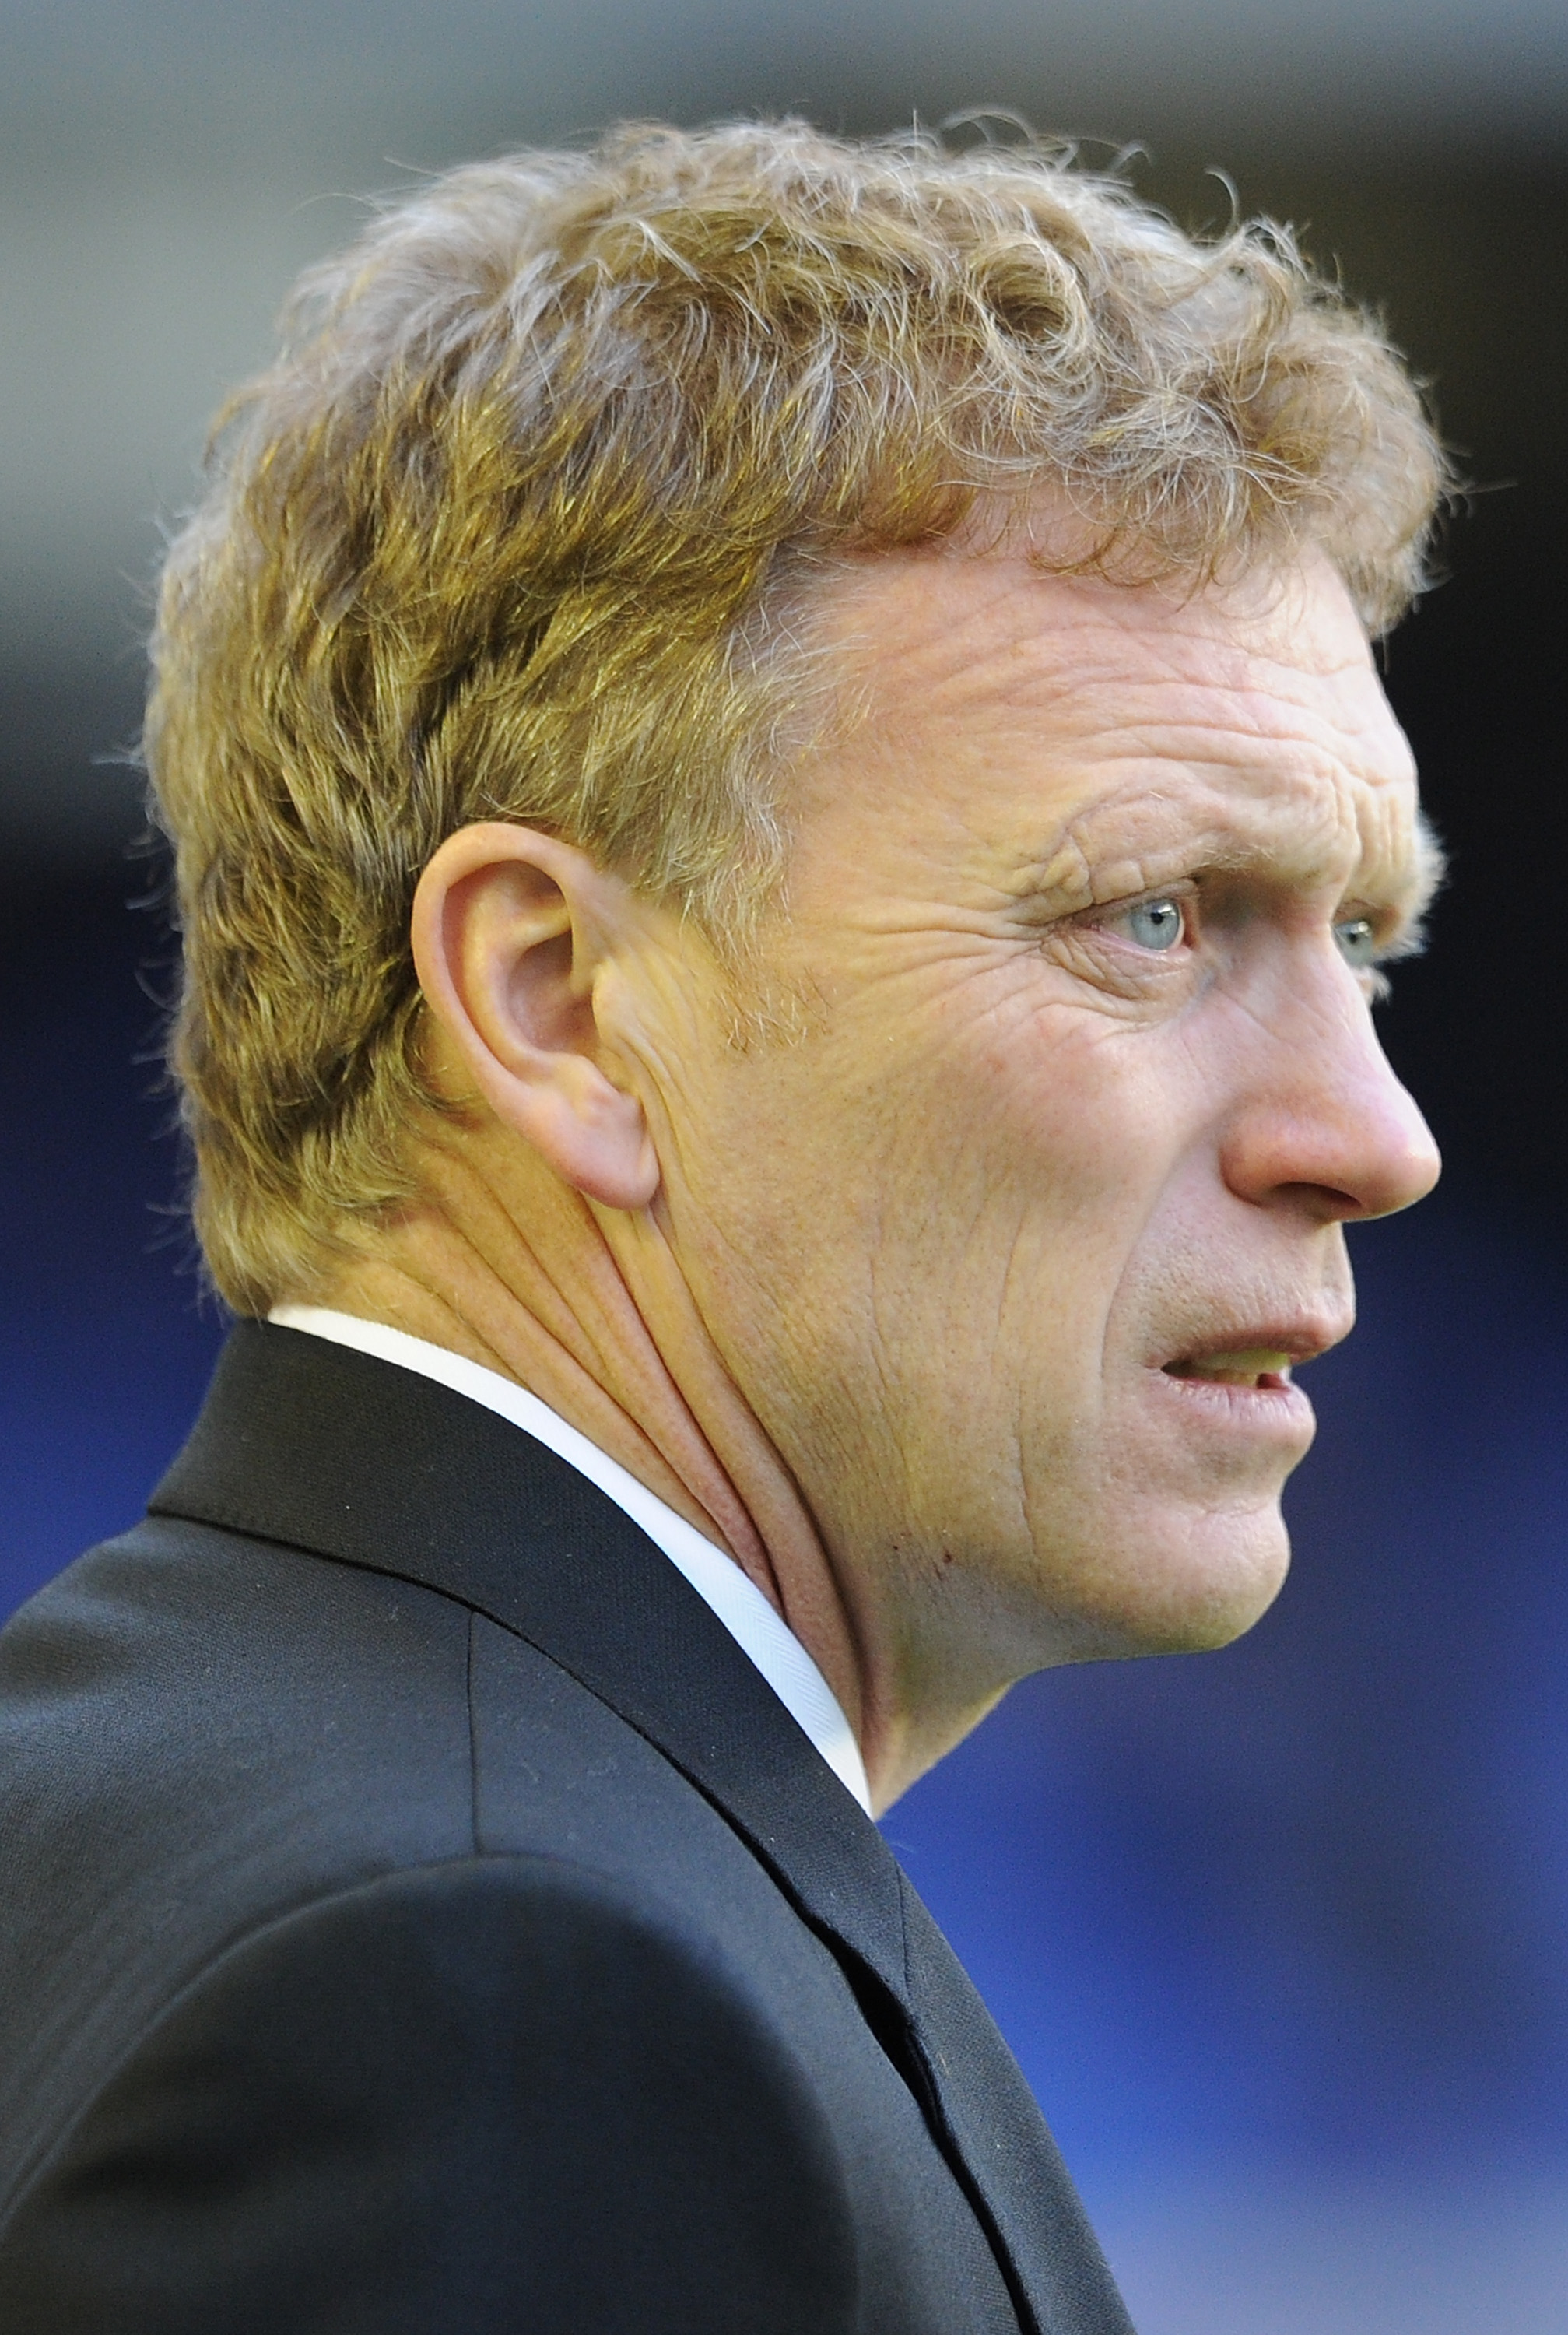 LIVERPOOL, ENGLAND - DECEMBER 11:  Everton manager David Moyes looks on during the Barclays Premier League match between Everton and Wigan Athletic at Goodison Park on December 11, 2010 in Liverpool, England.  (Photo by Chris Brunskill/Getty Images)